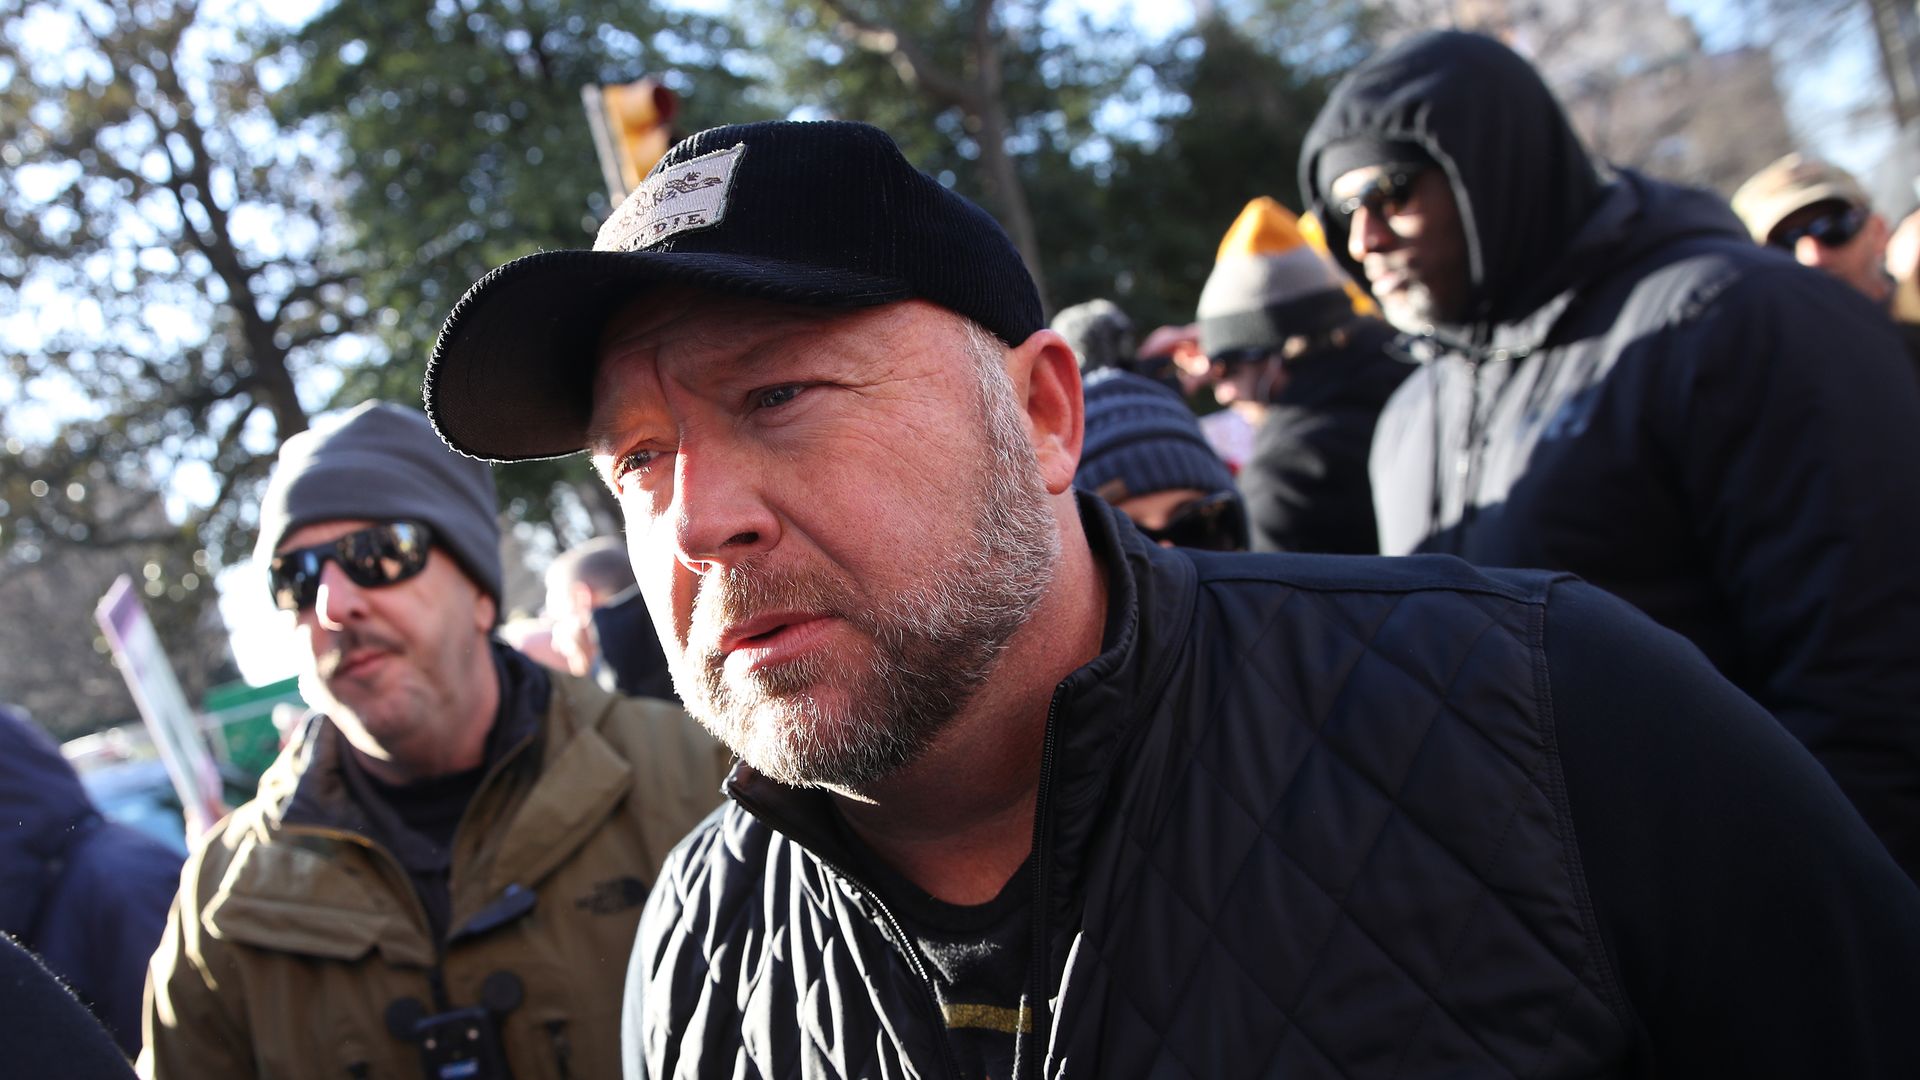 Photo of Alex Jones in a cap surrounded by protesters